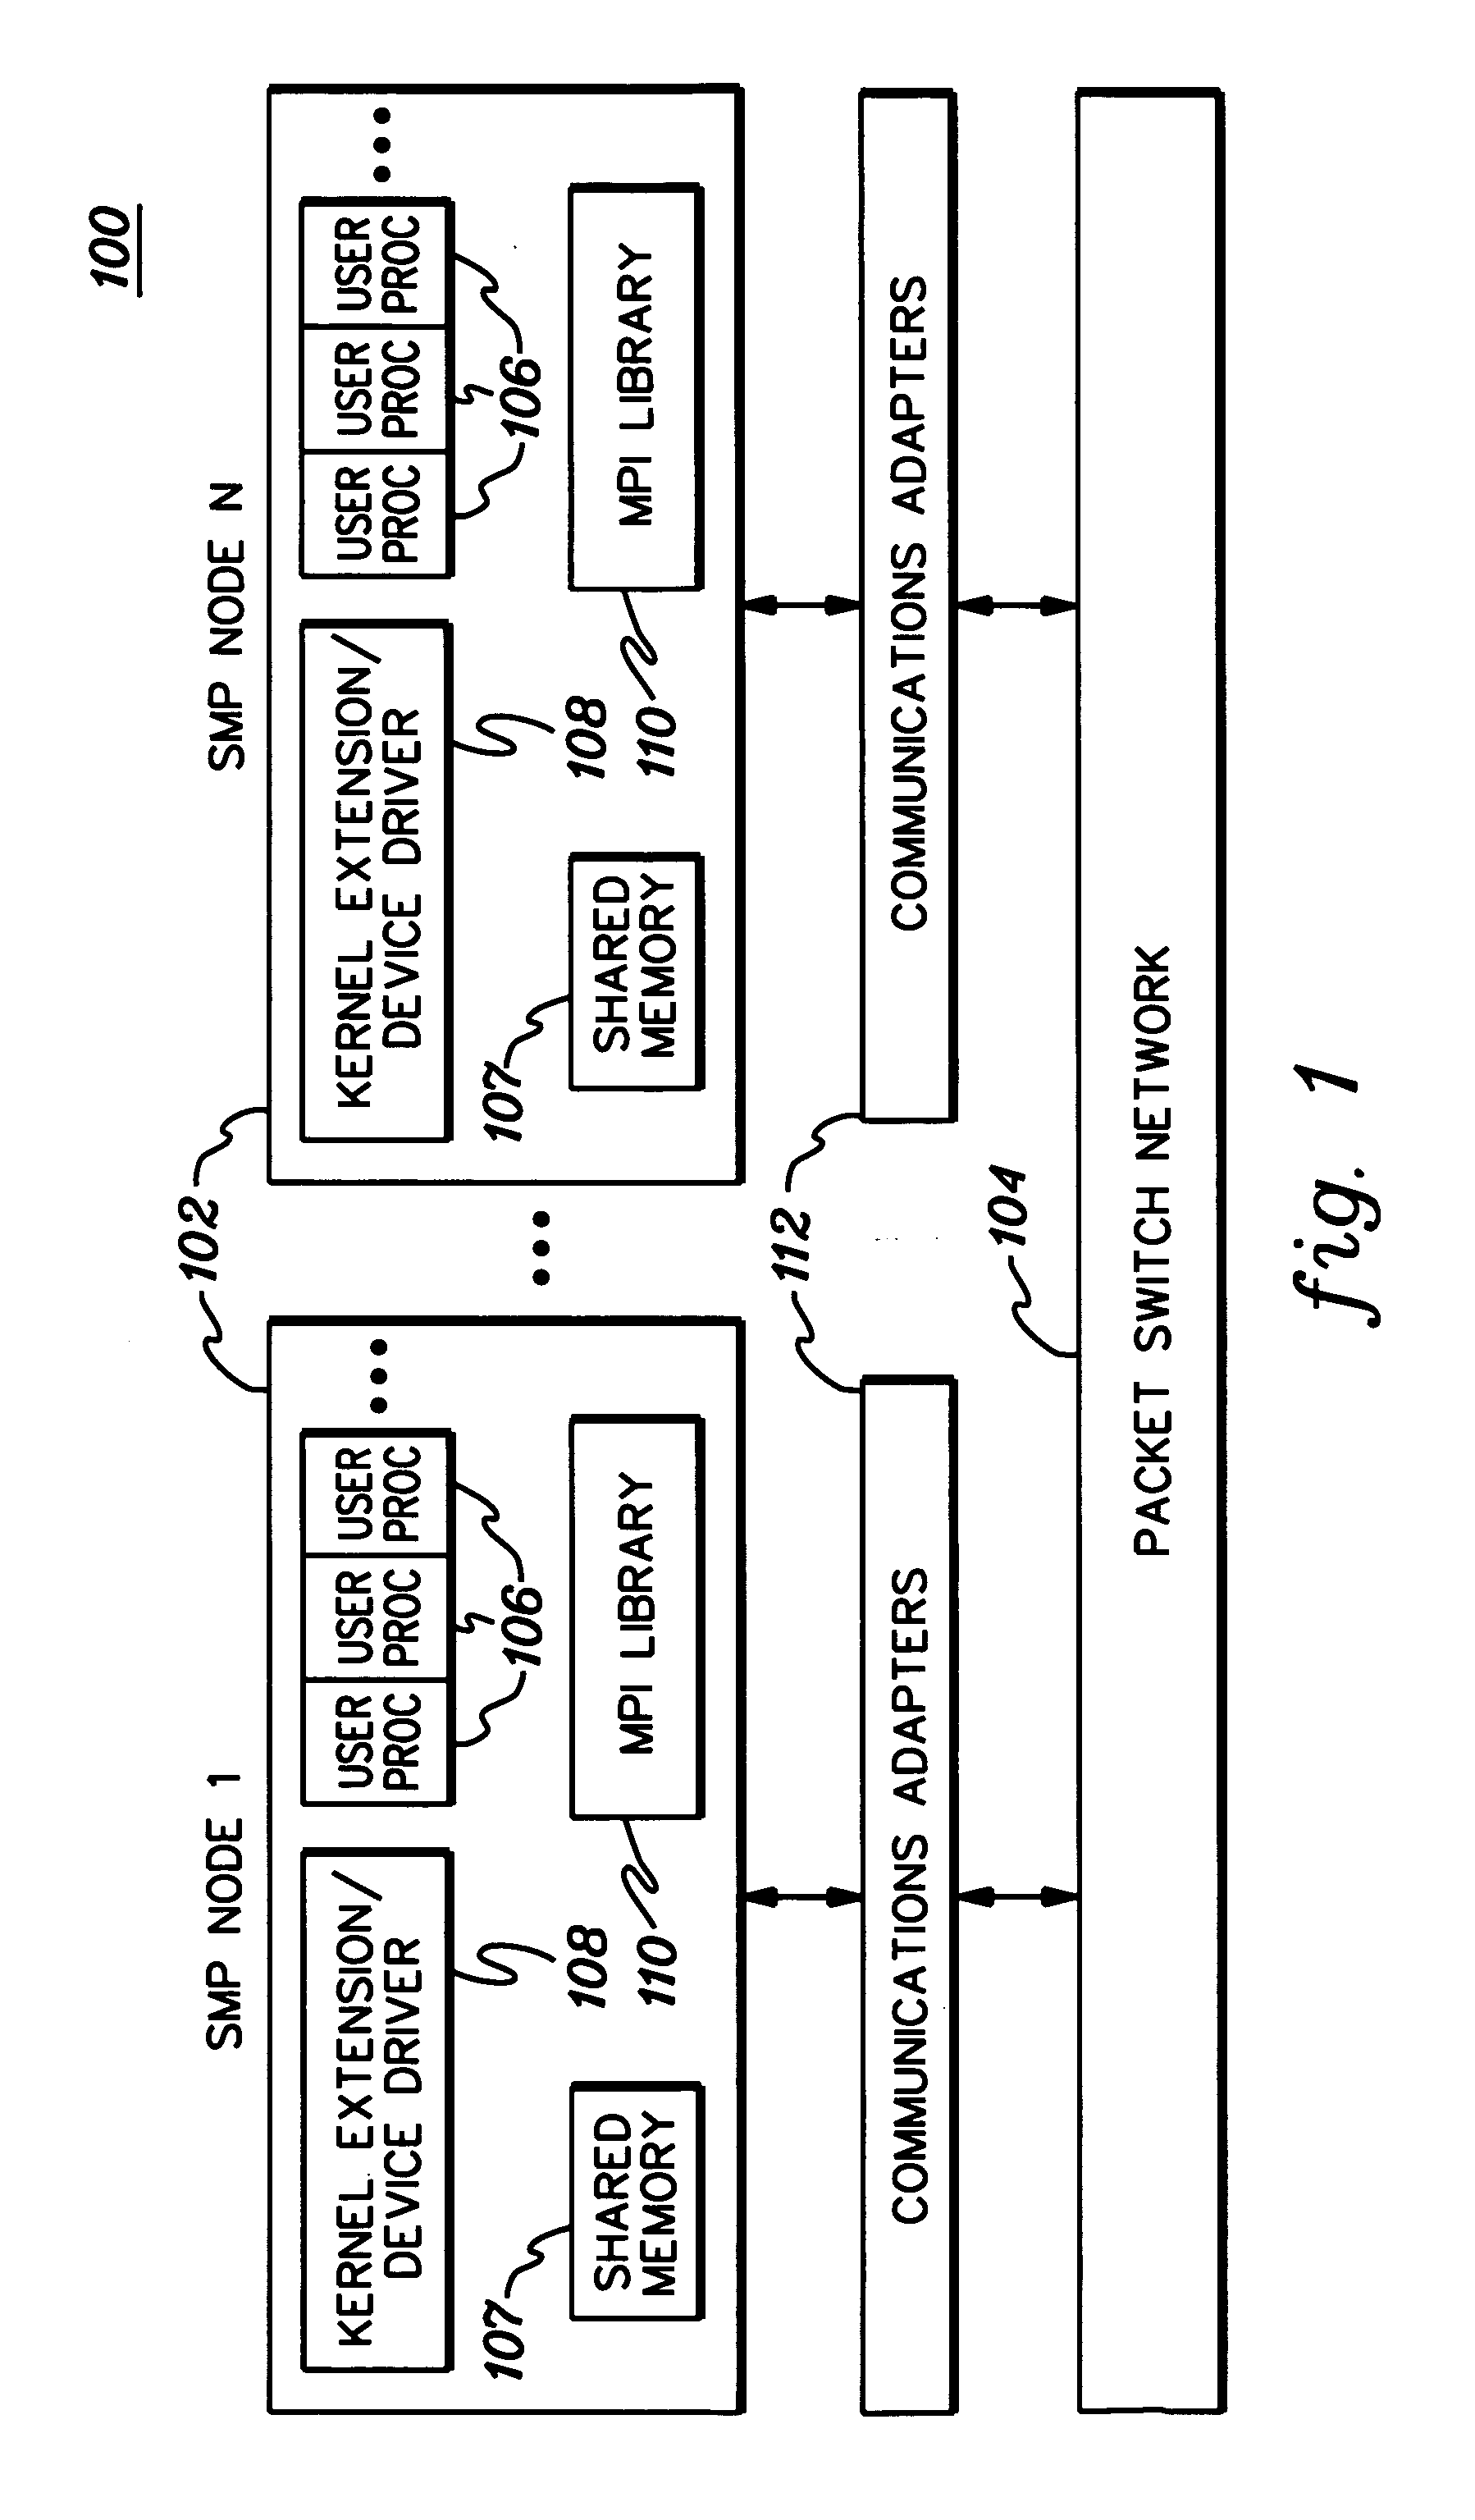 Method, system and program product for communicating among processes in a symmetric multi-processing cluster environment